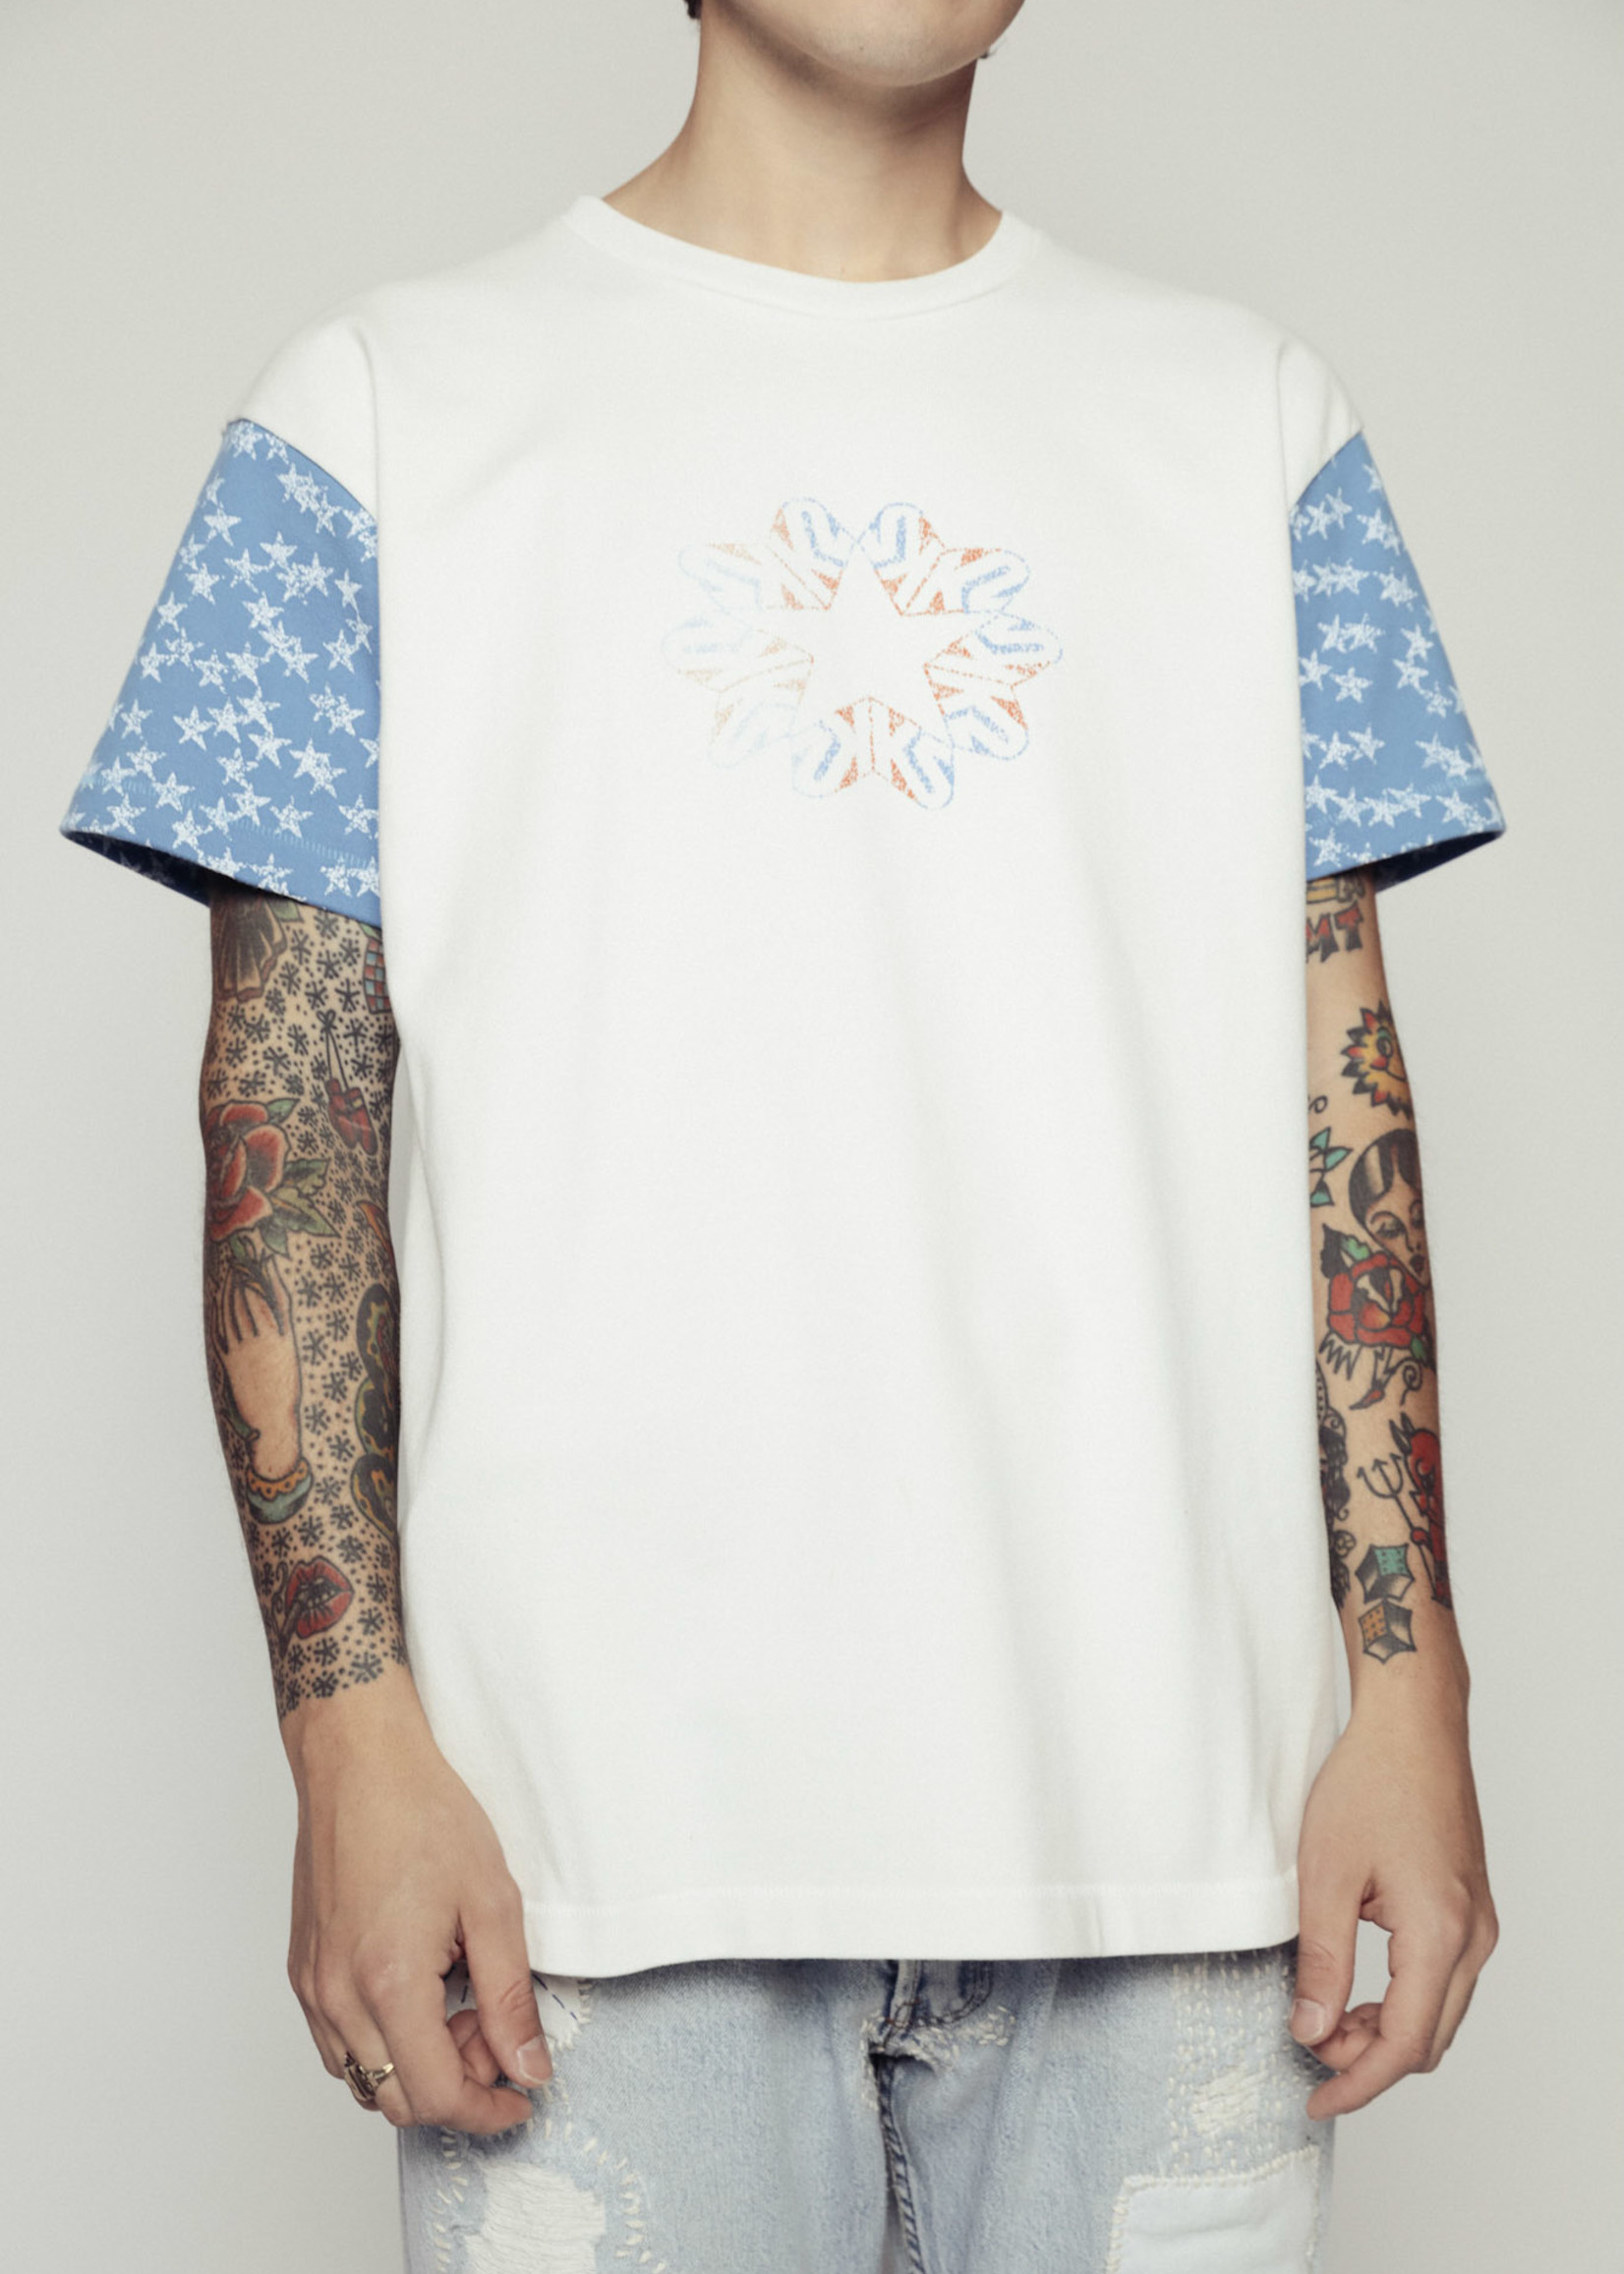 ERL Star Sleeve T-shirt in Blue and White